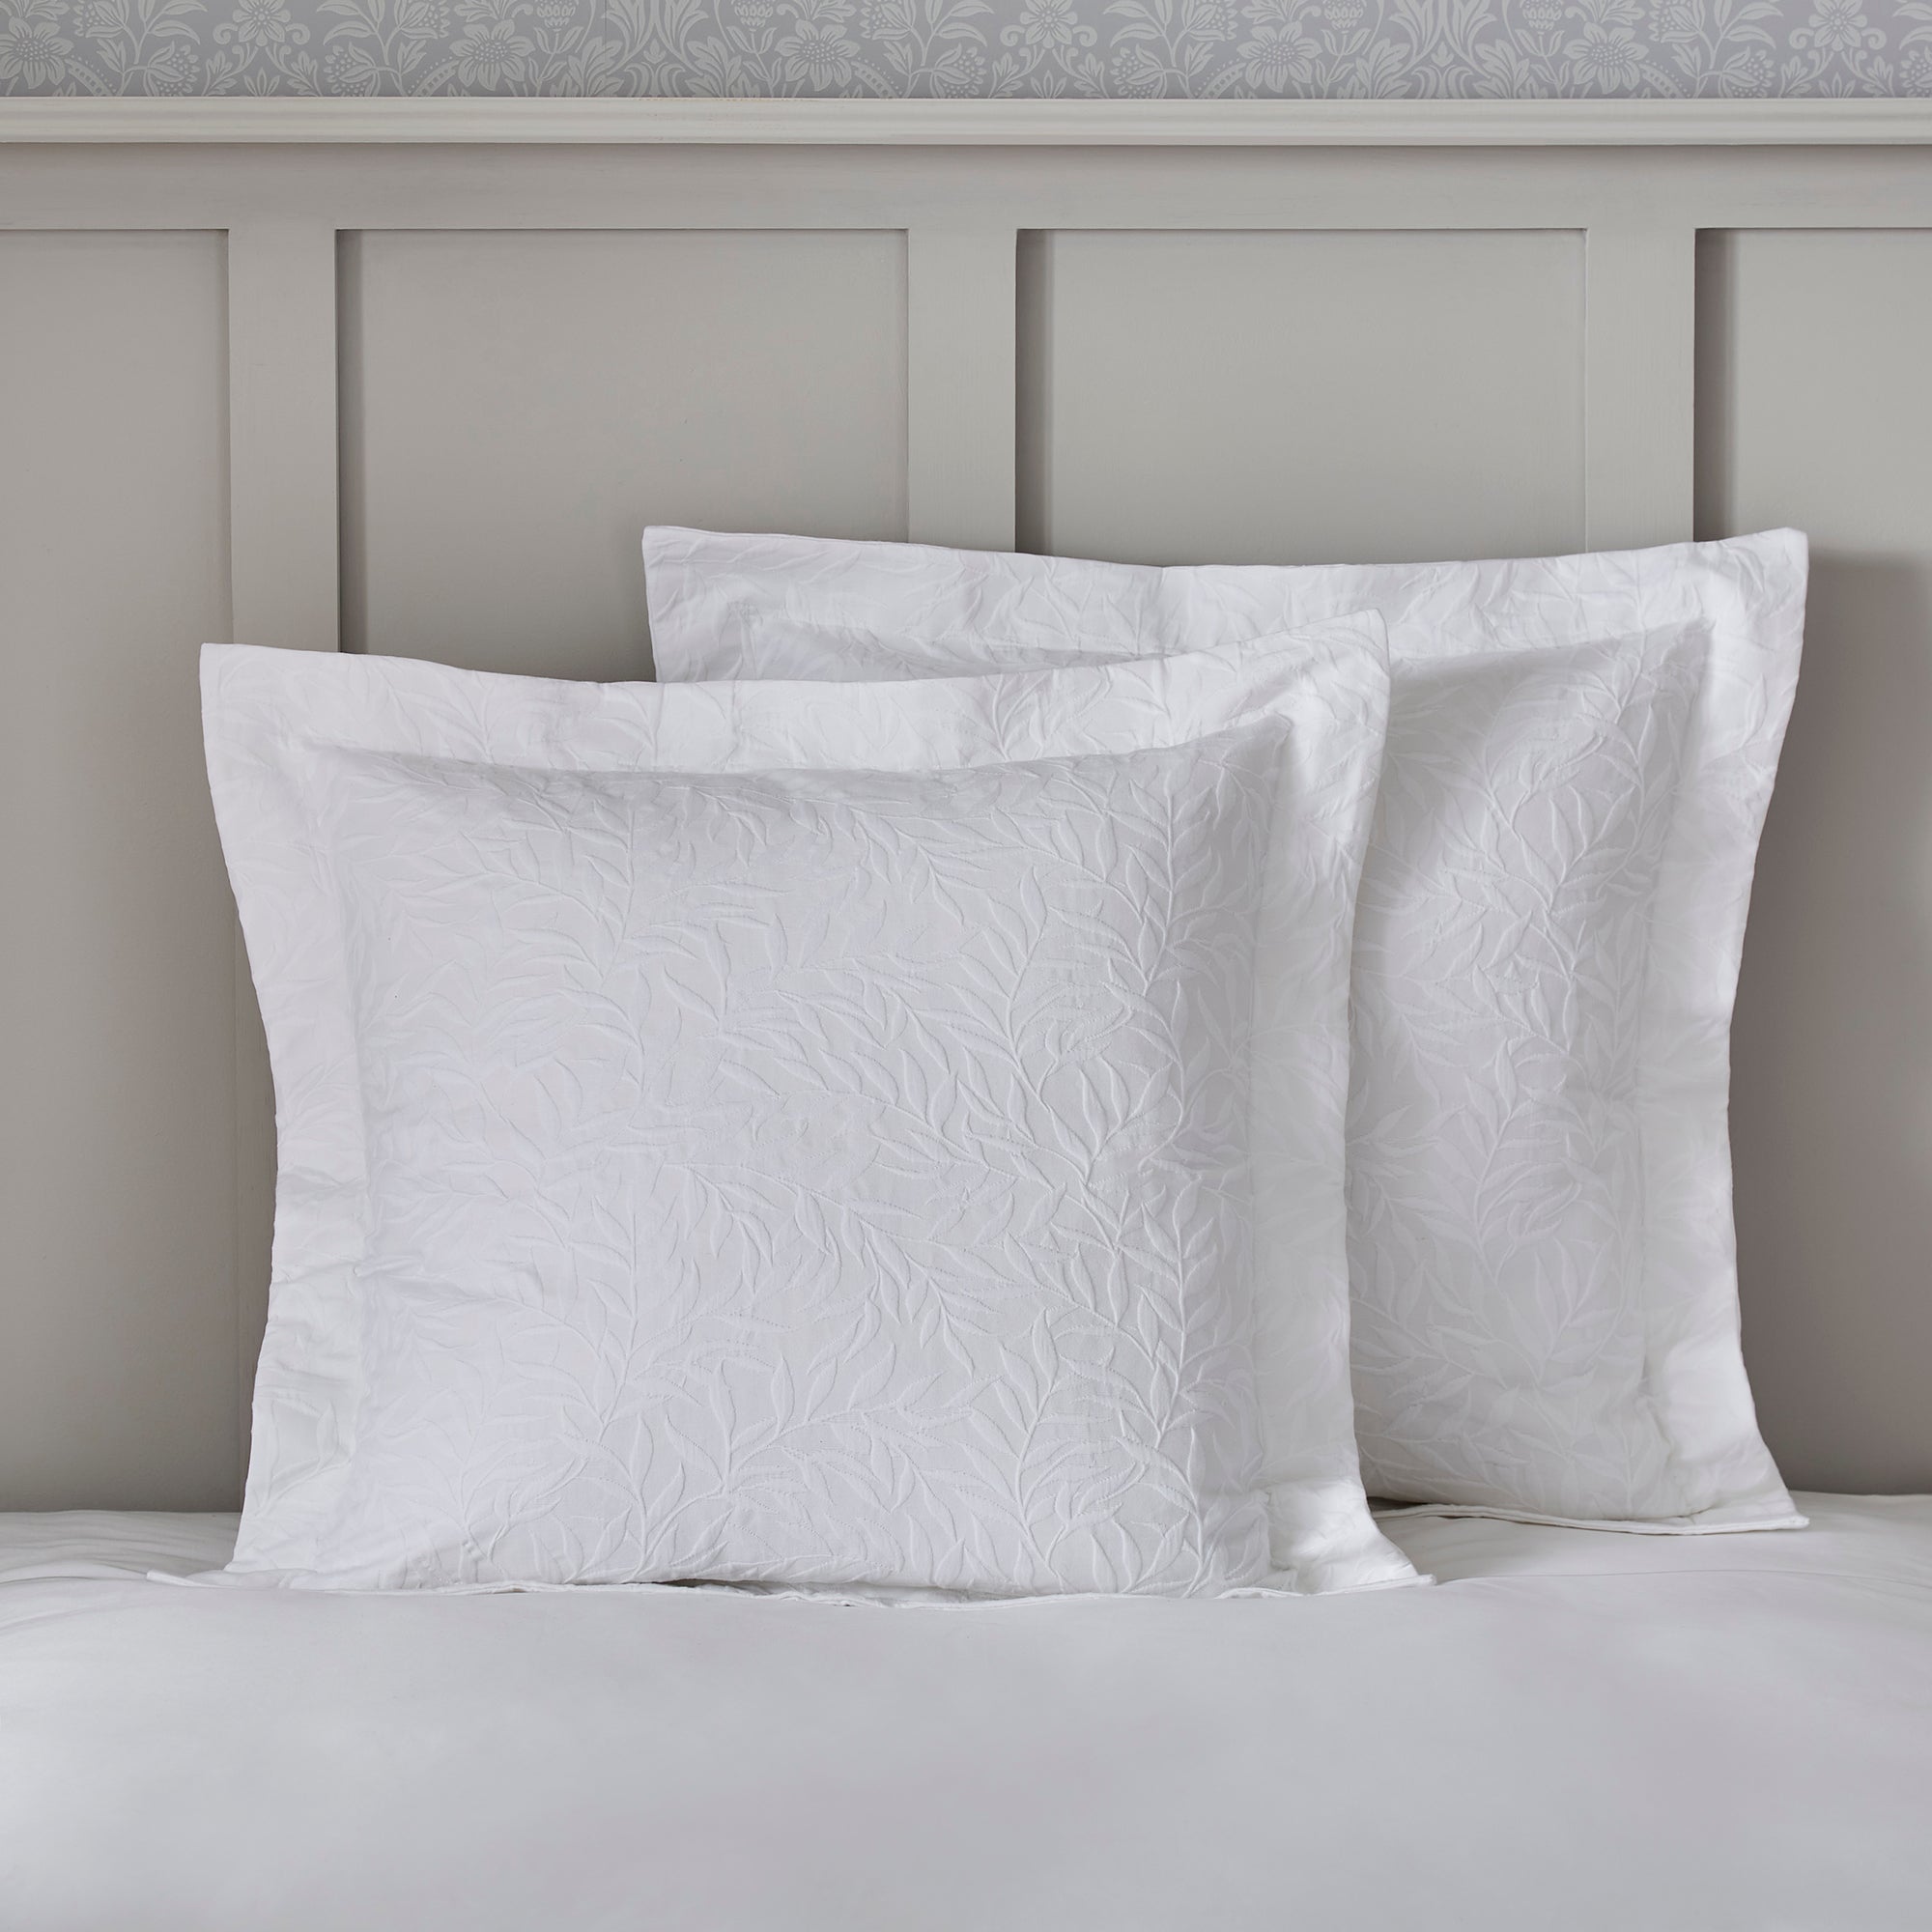 Dorma Purity Willow Leaf Matelasse Continental Pillowcase White